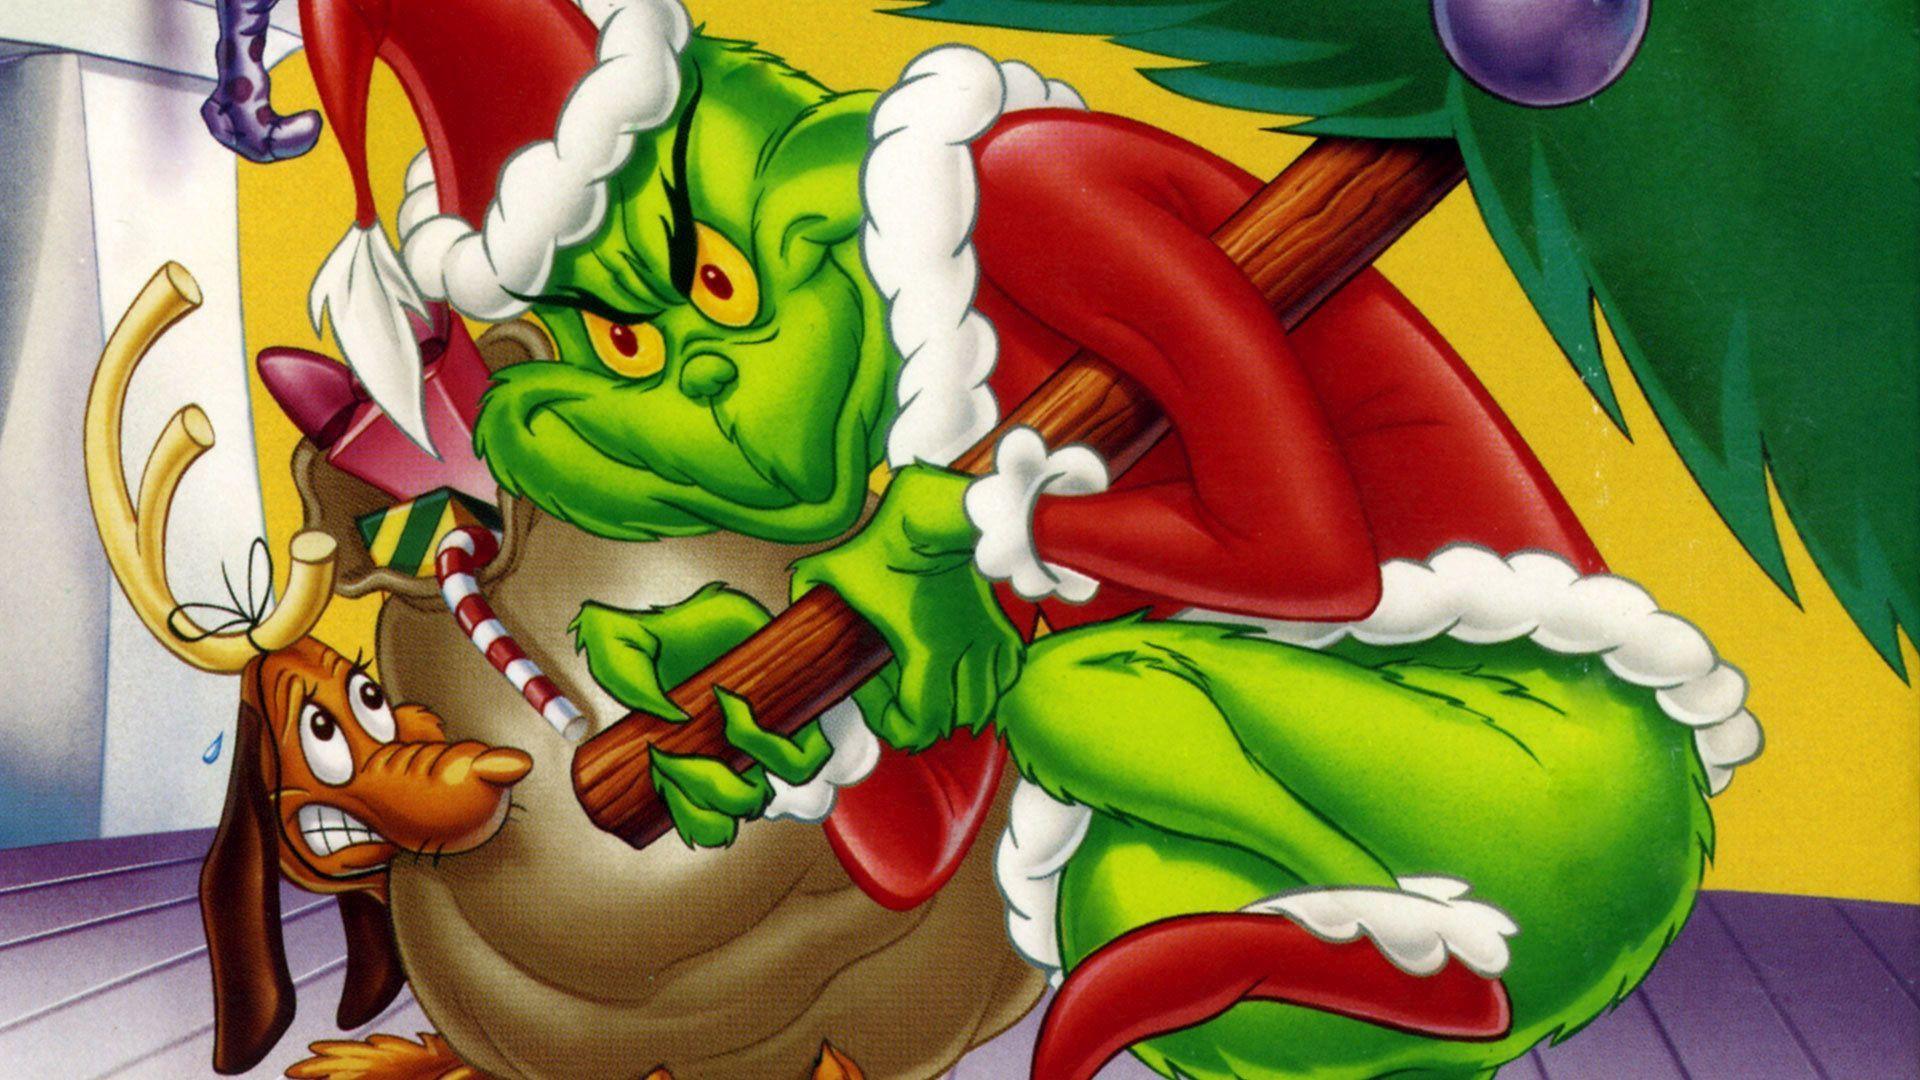 2. "The Grinch Who Stole Gifts" - wide 10